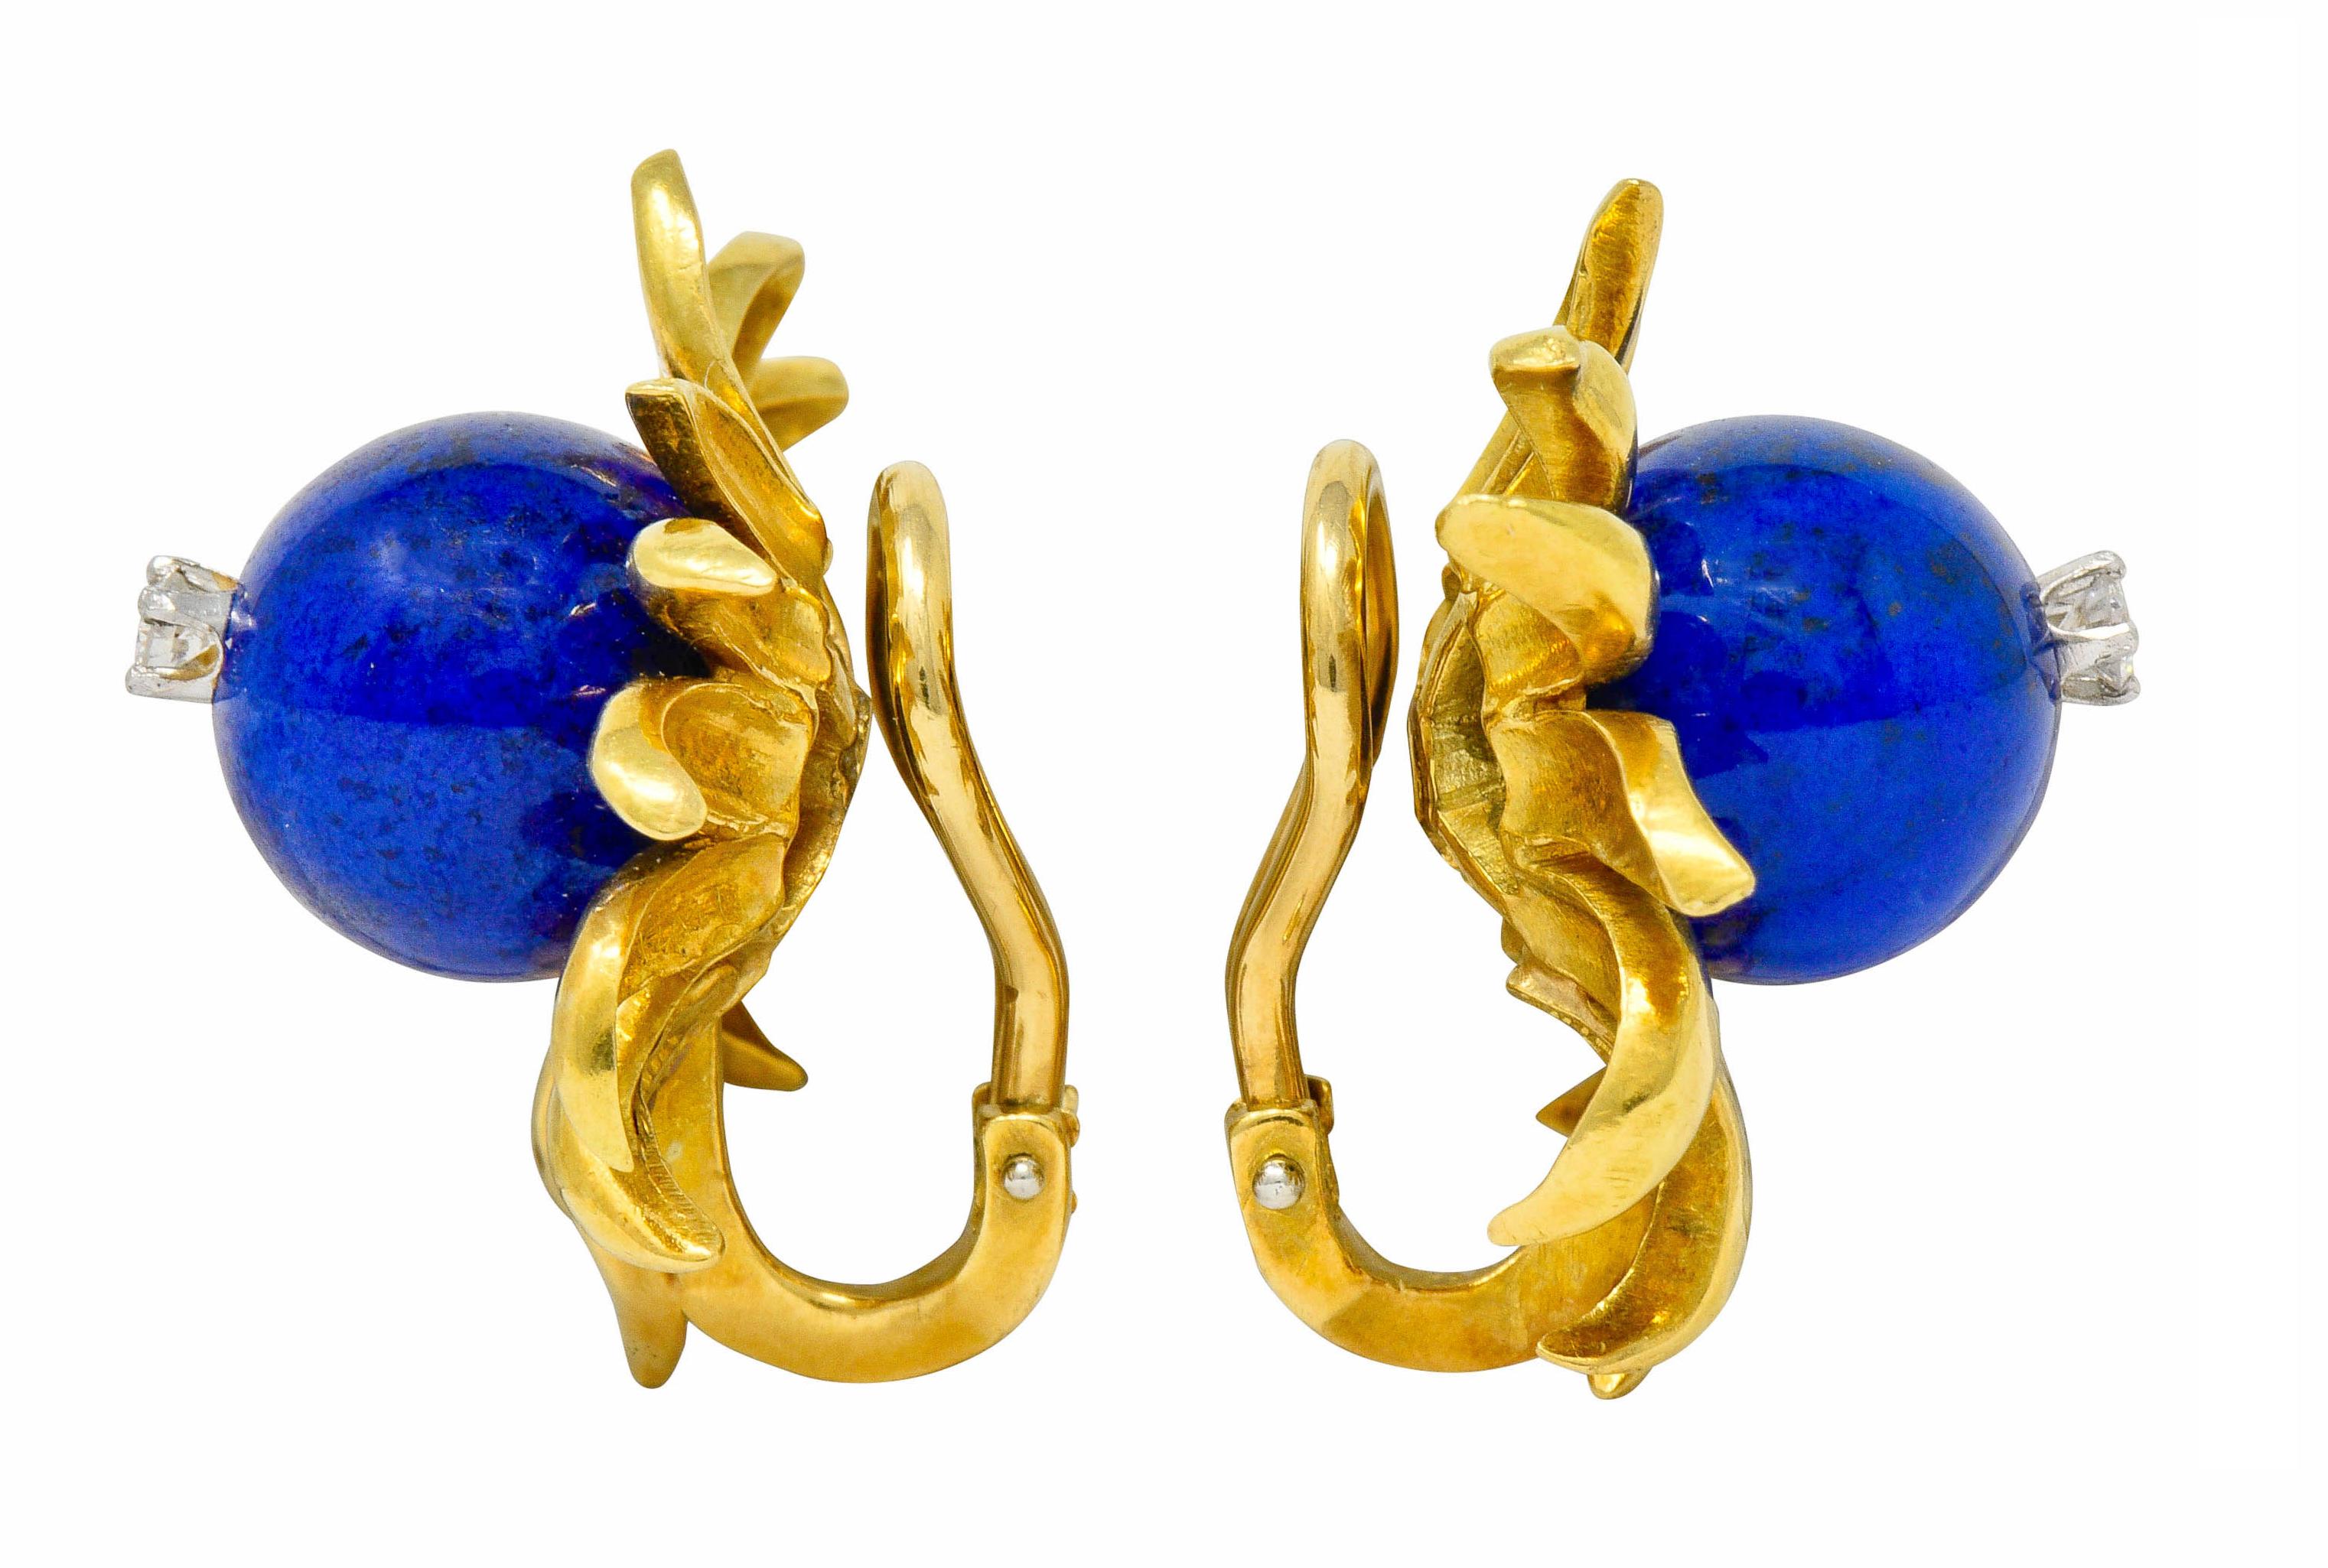 Designed as a stylized flower with wildly dynamic polished gold petals

Featuring an 11.0 mm lapis ball, opaque with incredibly even ultramarine blue color

Centering a round brilliant cut diamond, set in platinum, weighing in total approximately